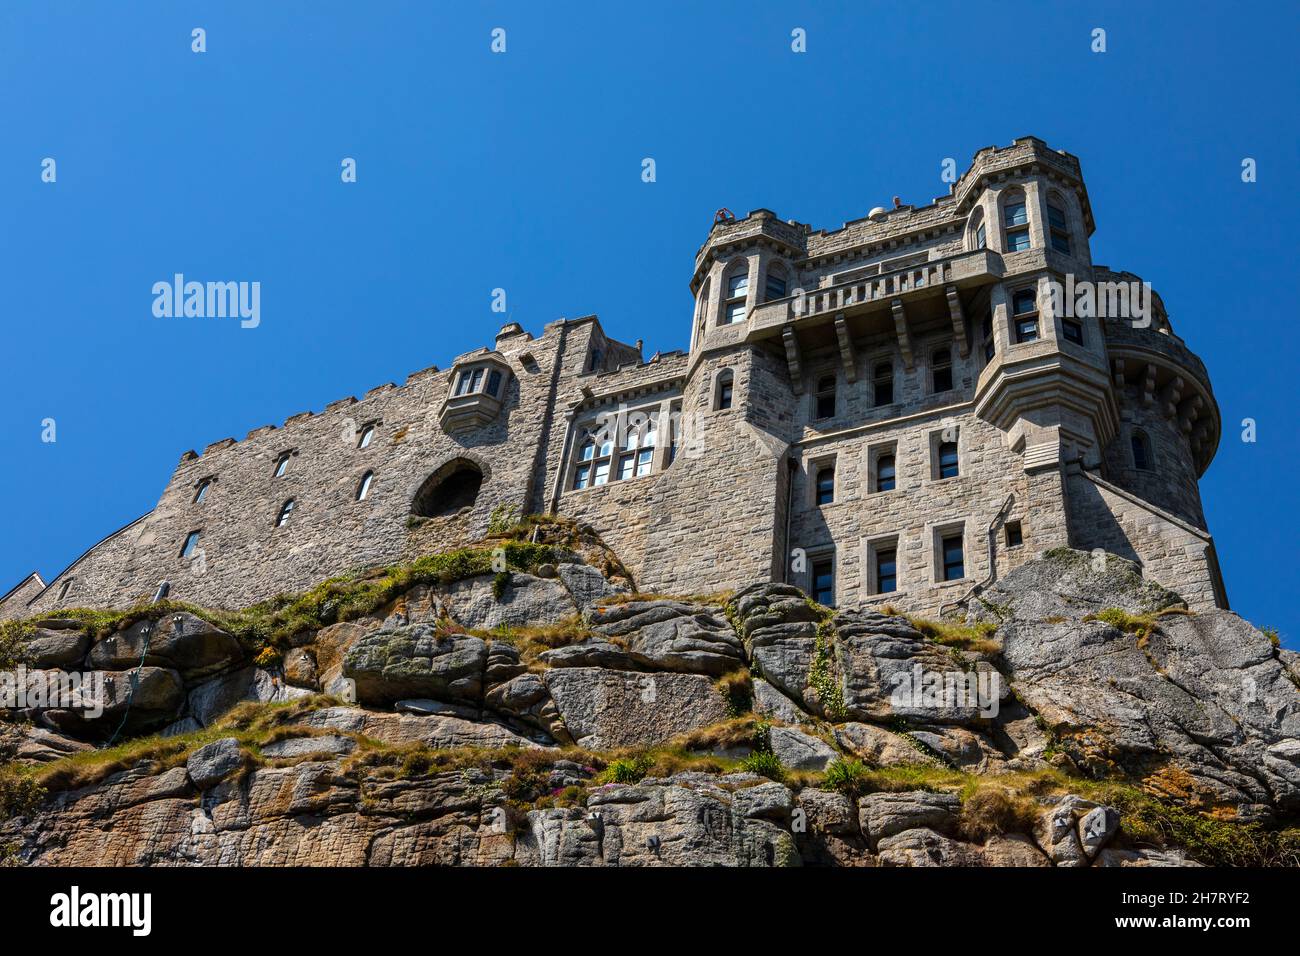 The castle on the historic st. Michaels Mount in Cornwall, UK. Stock Photo